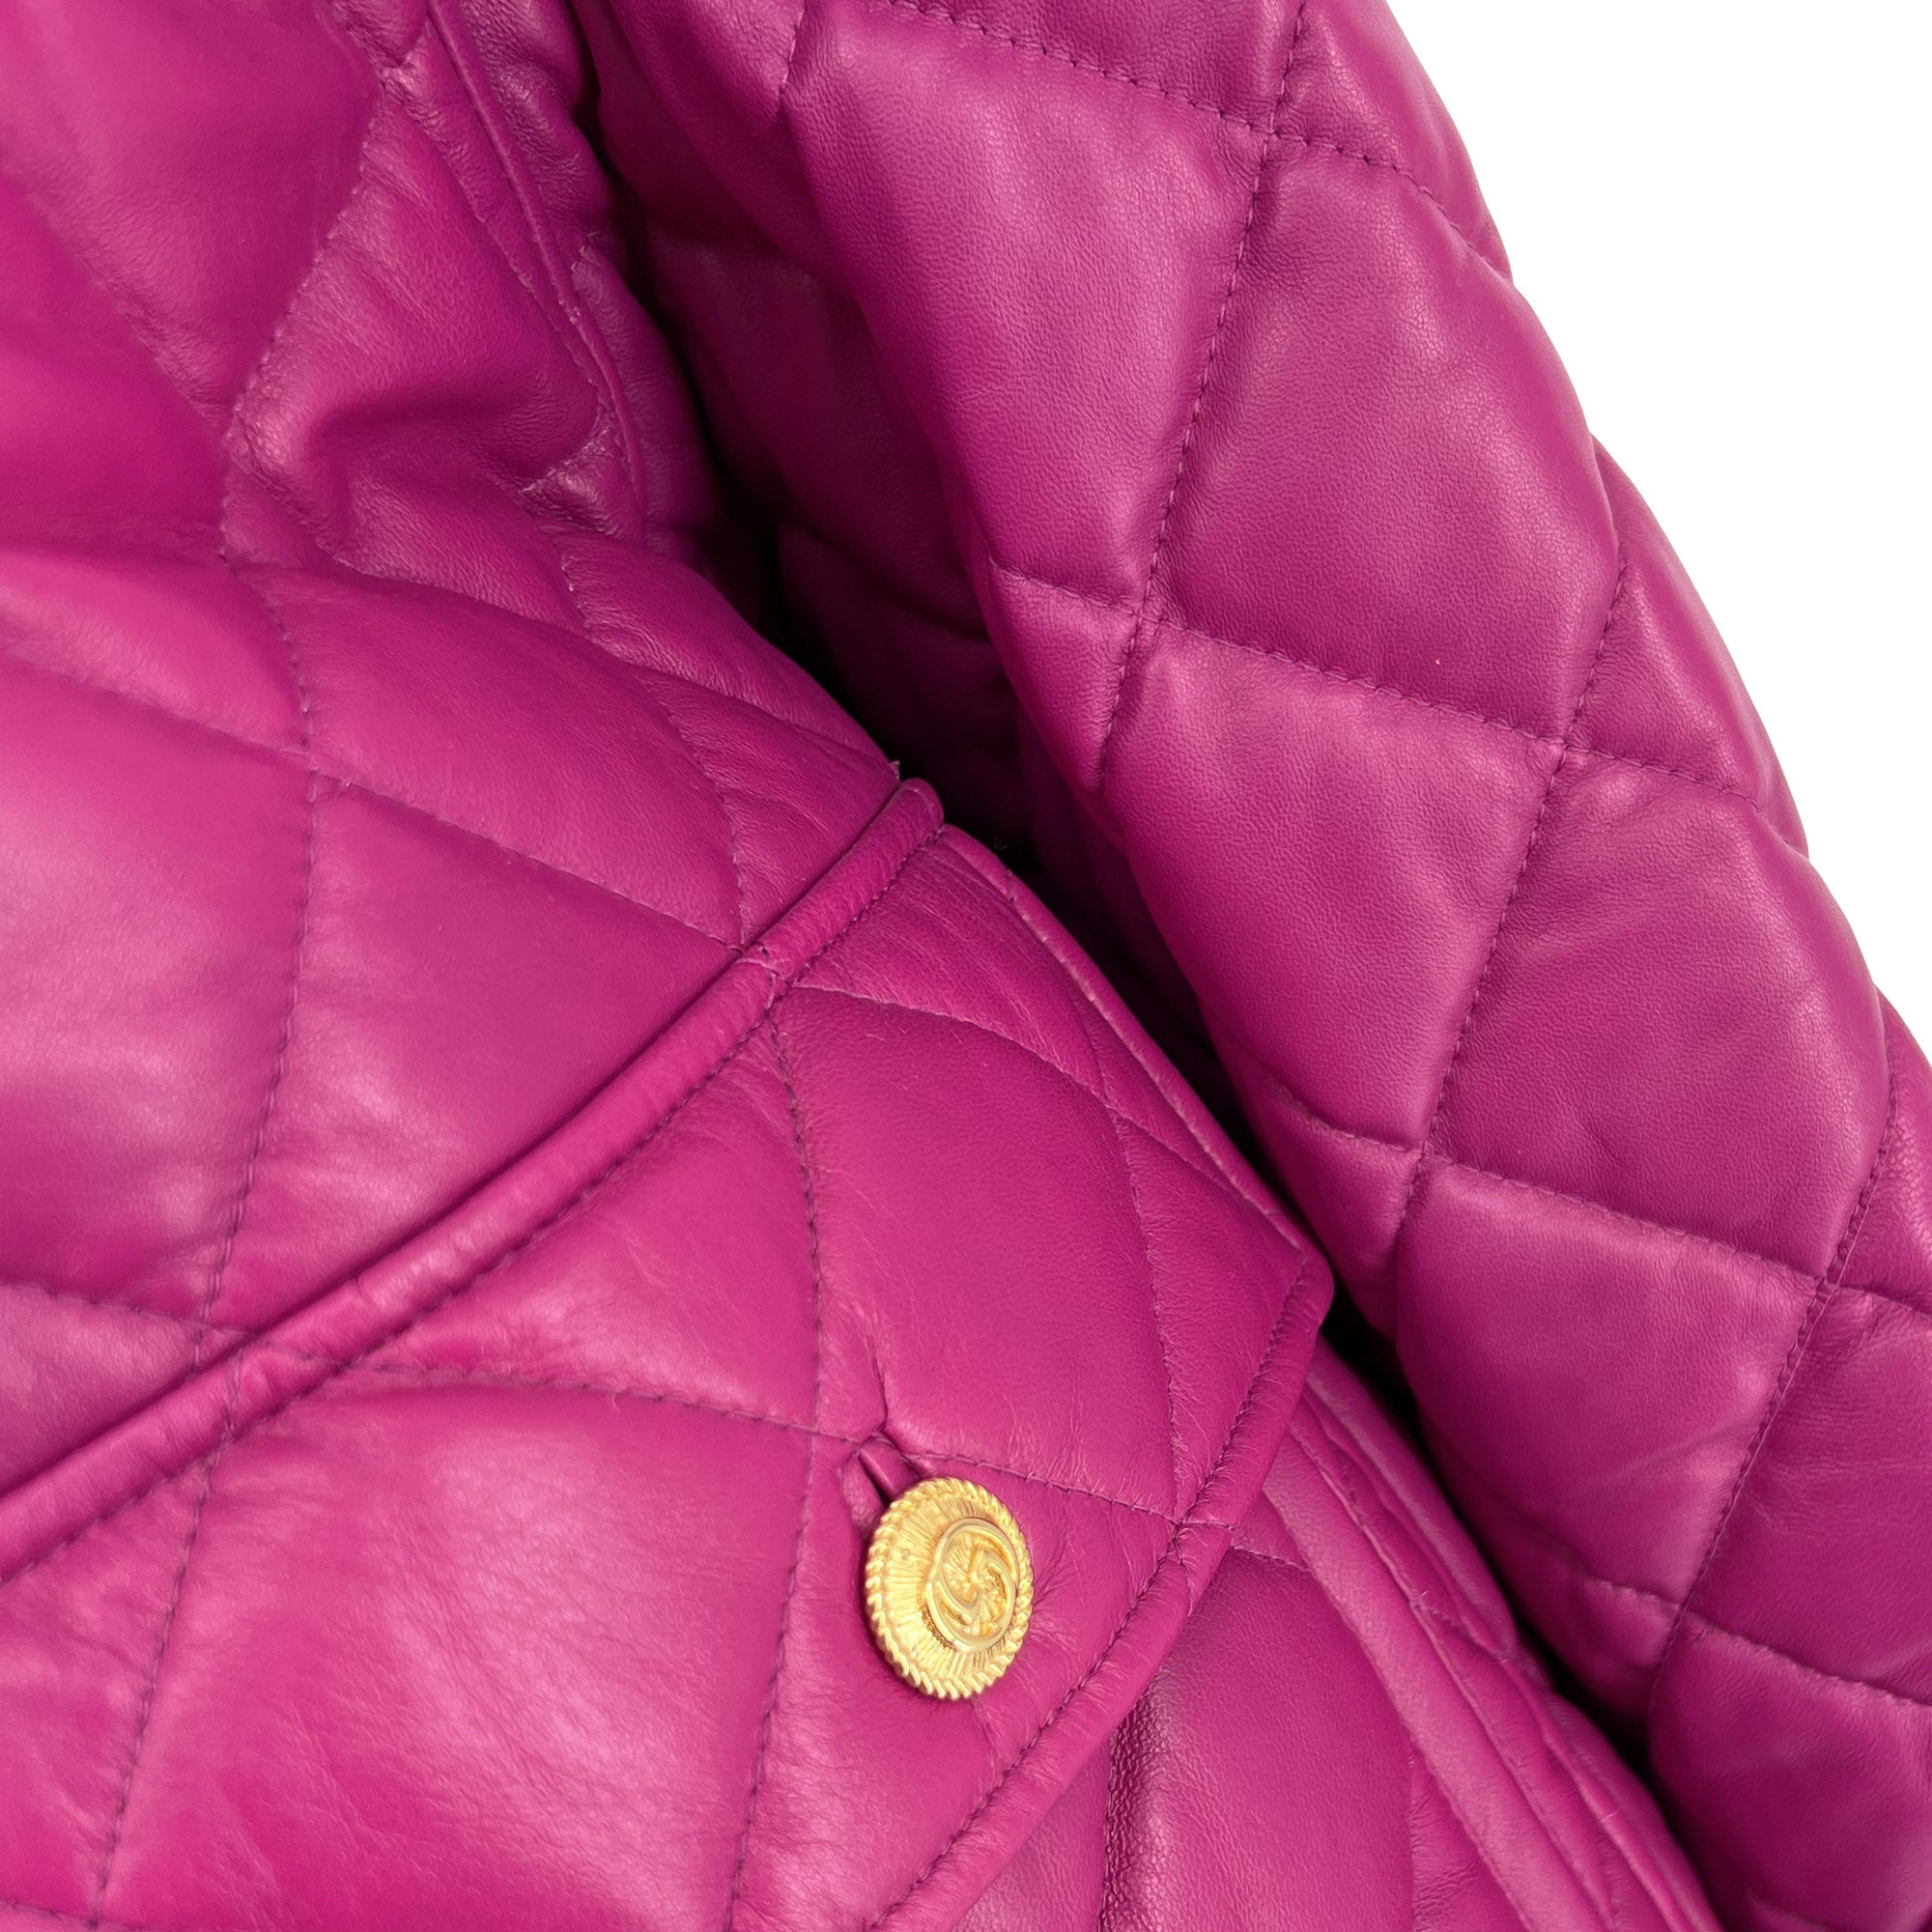 Gucci Quilted Bomber Jacket